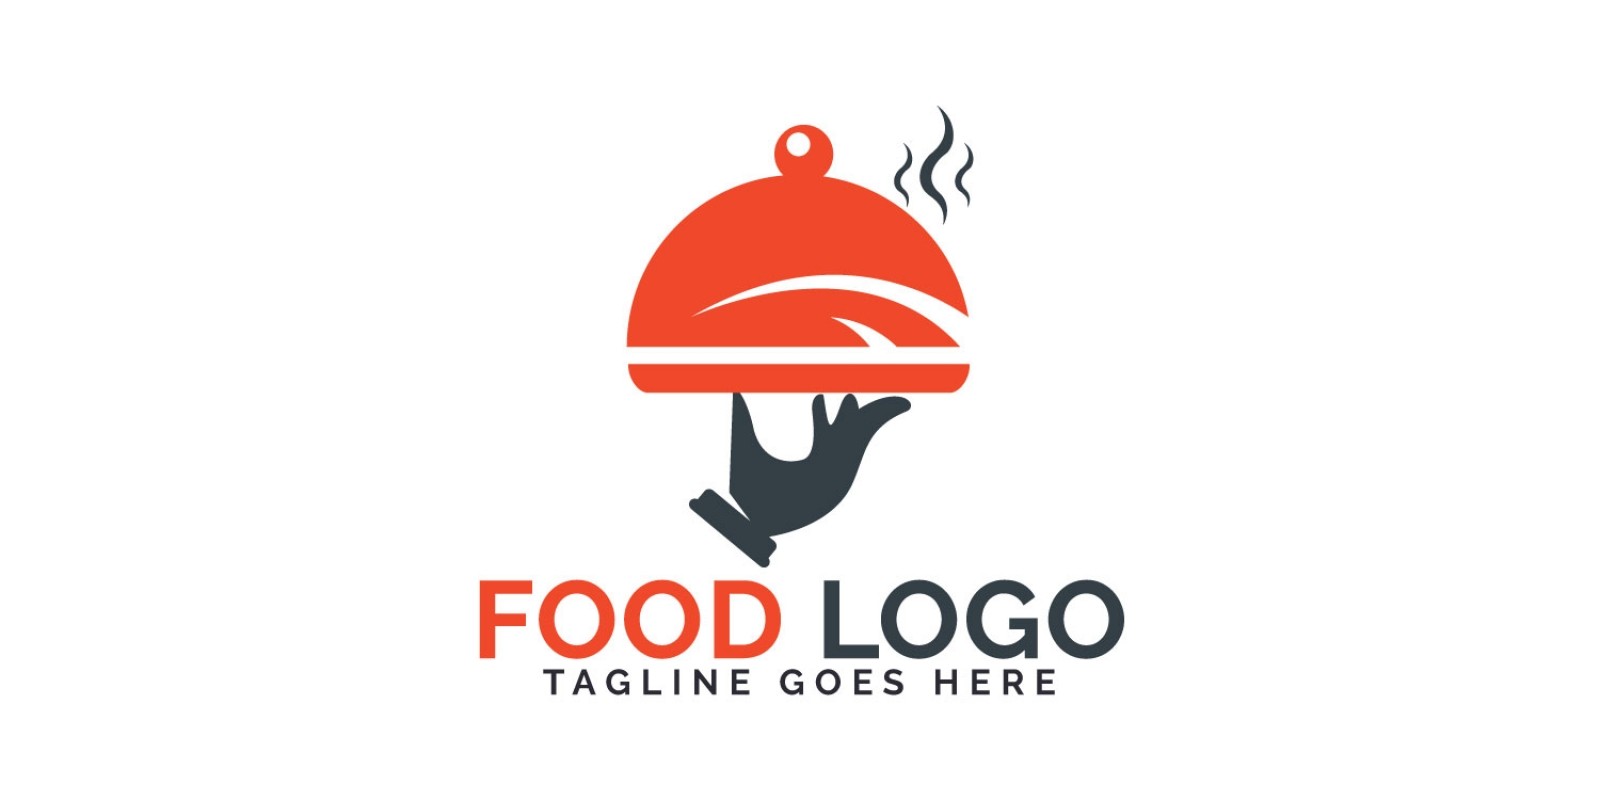 Home Cooked Food Logo | tunersread.com